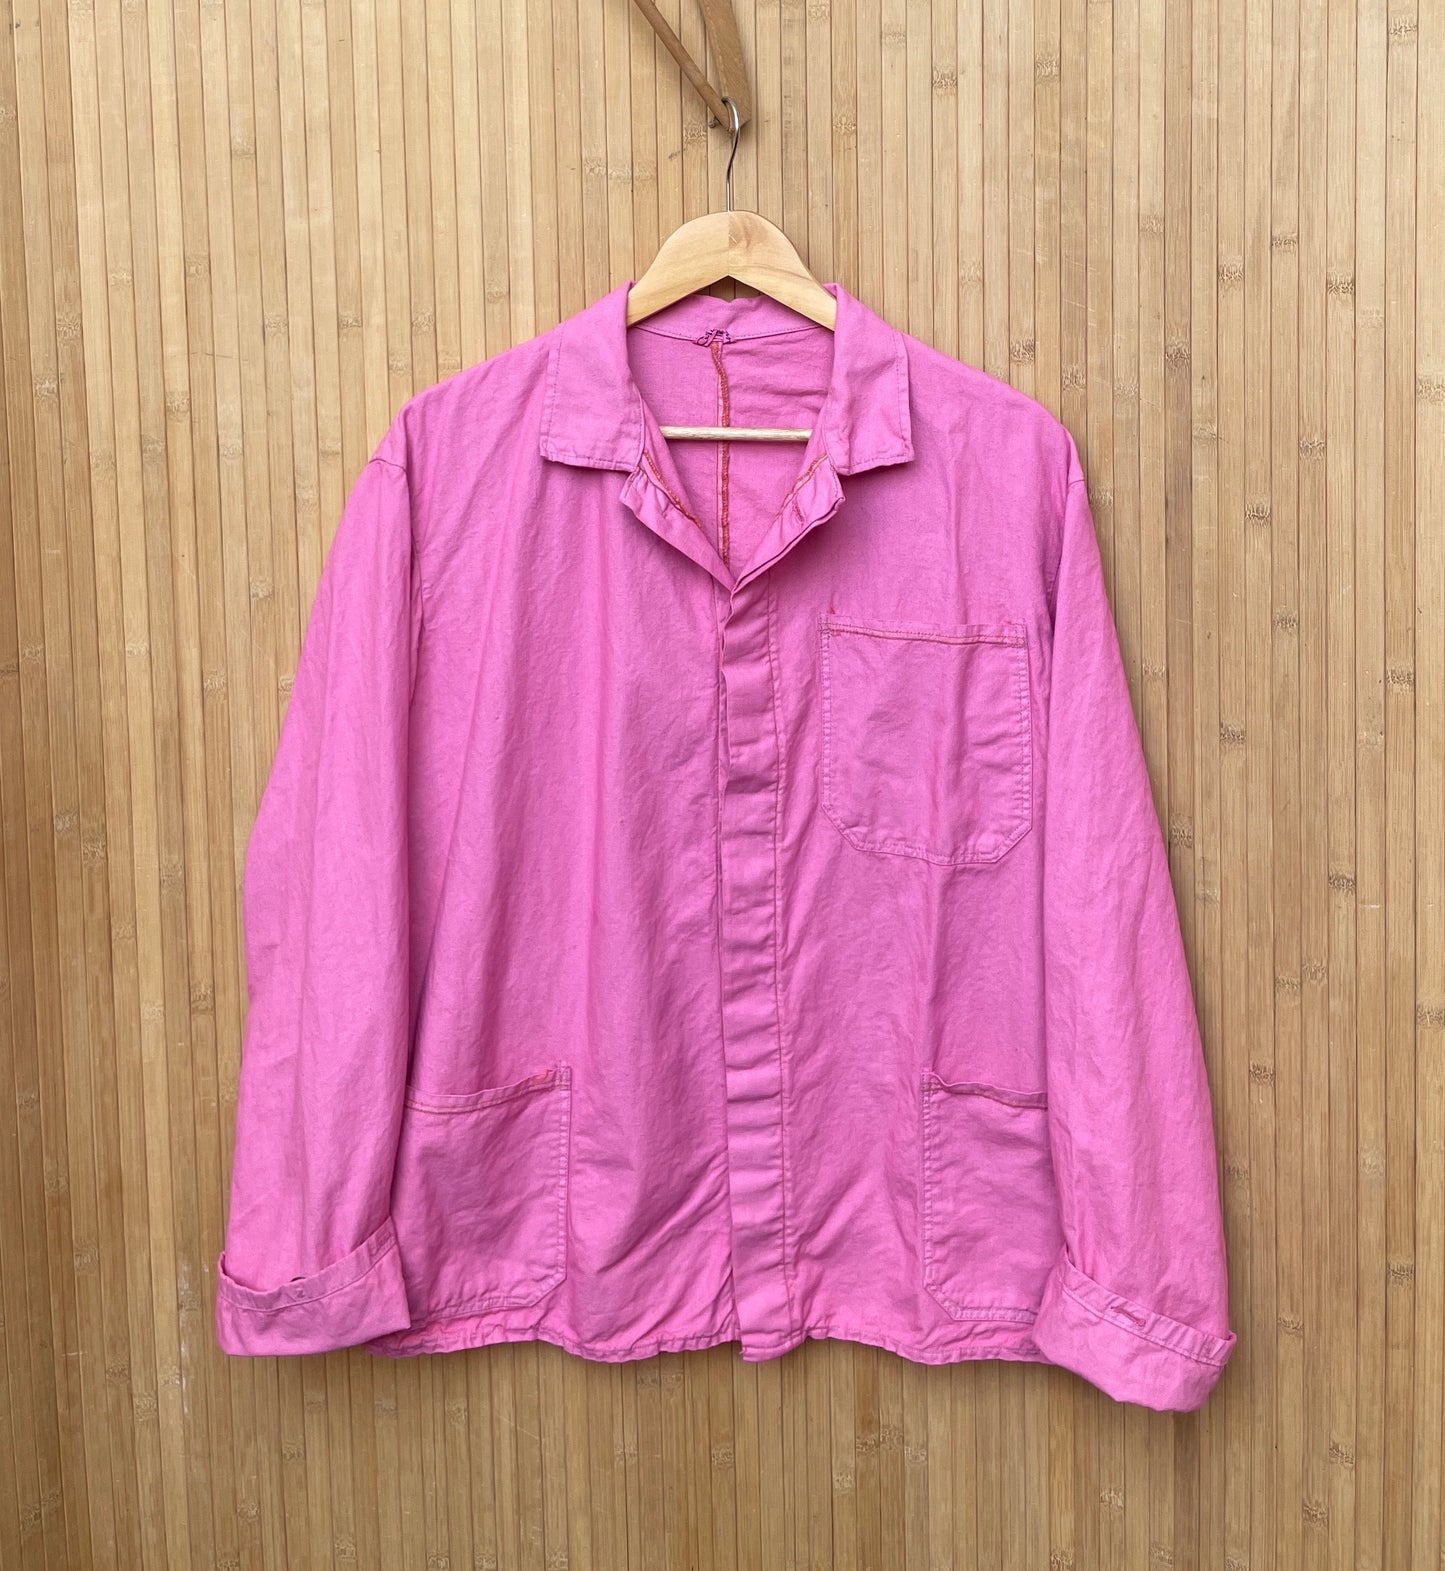 Vintage French Chore Shirt Pink Cotton